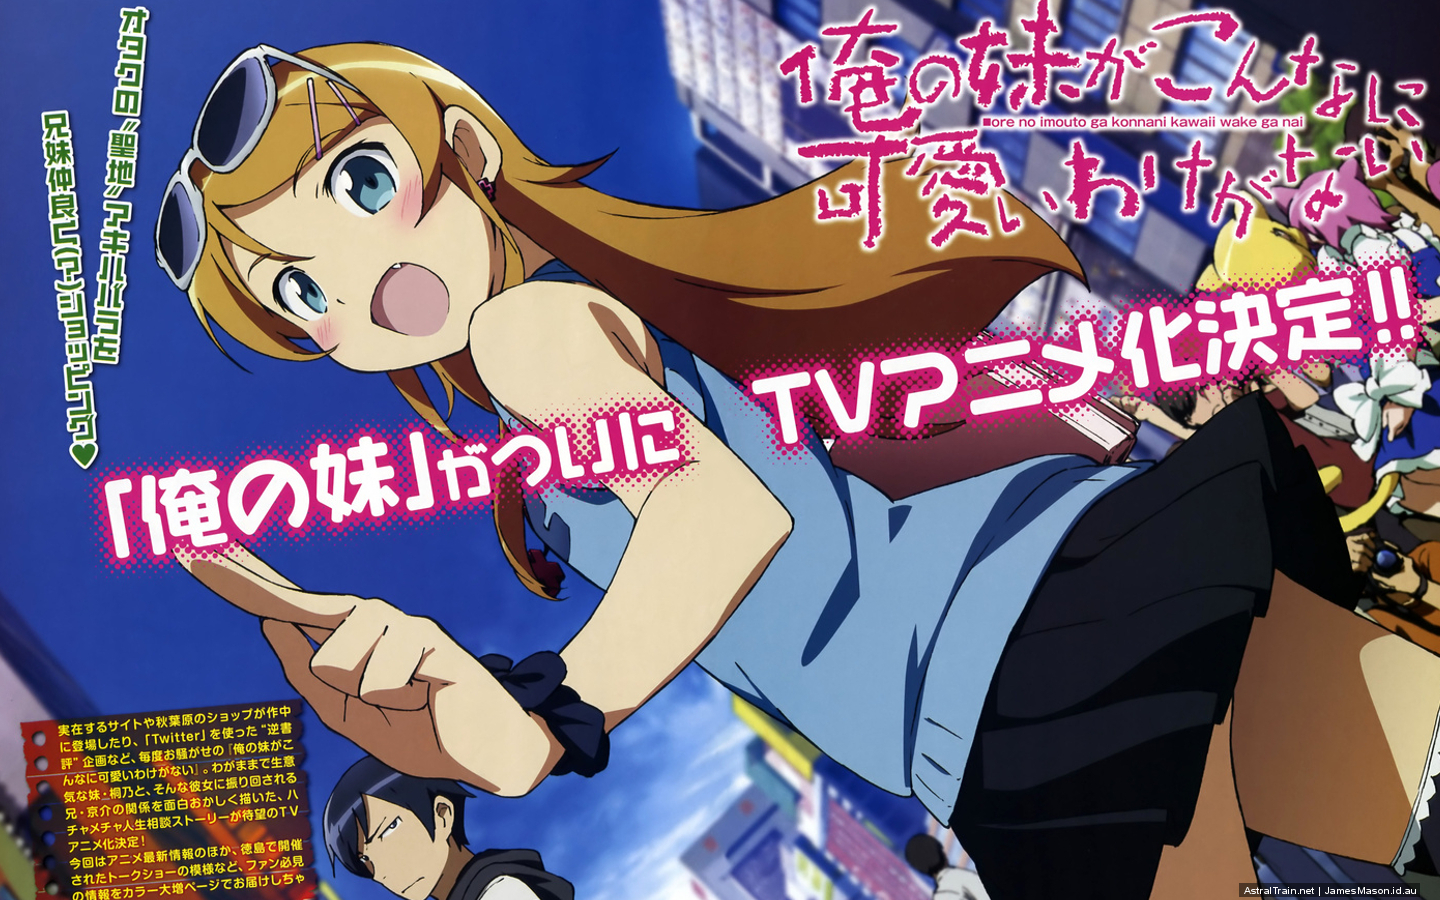 Lumforever Images Oreimo~ Hd Wallpaper And Background - 我 的 妹妹 那 有 這麼 可愛 , HD Wallpaper & Backgrounds